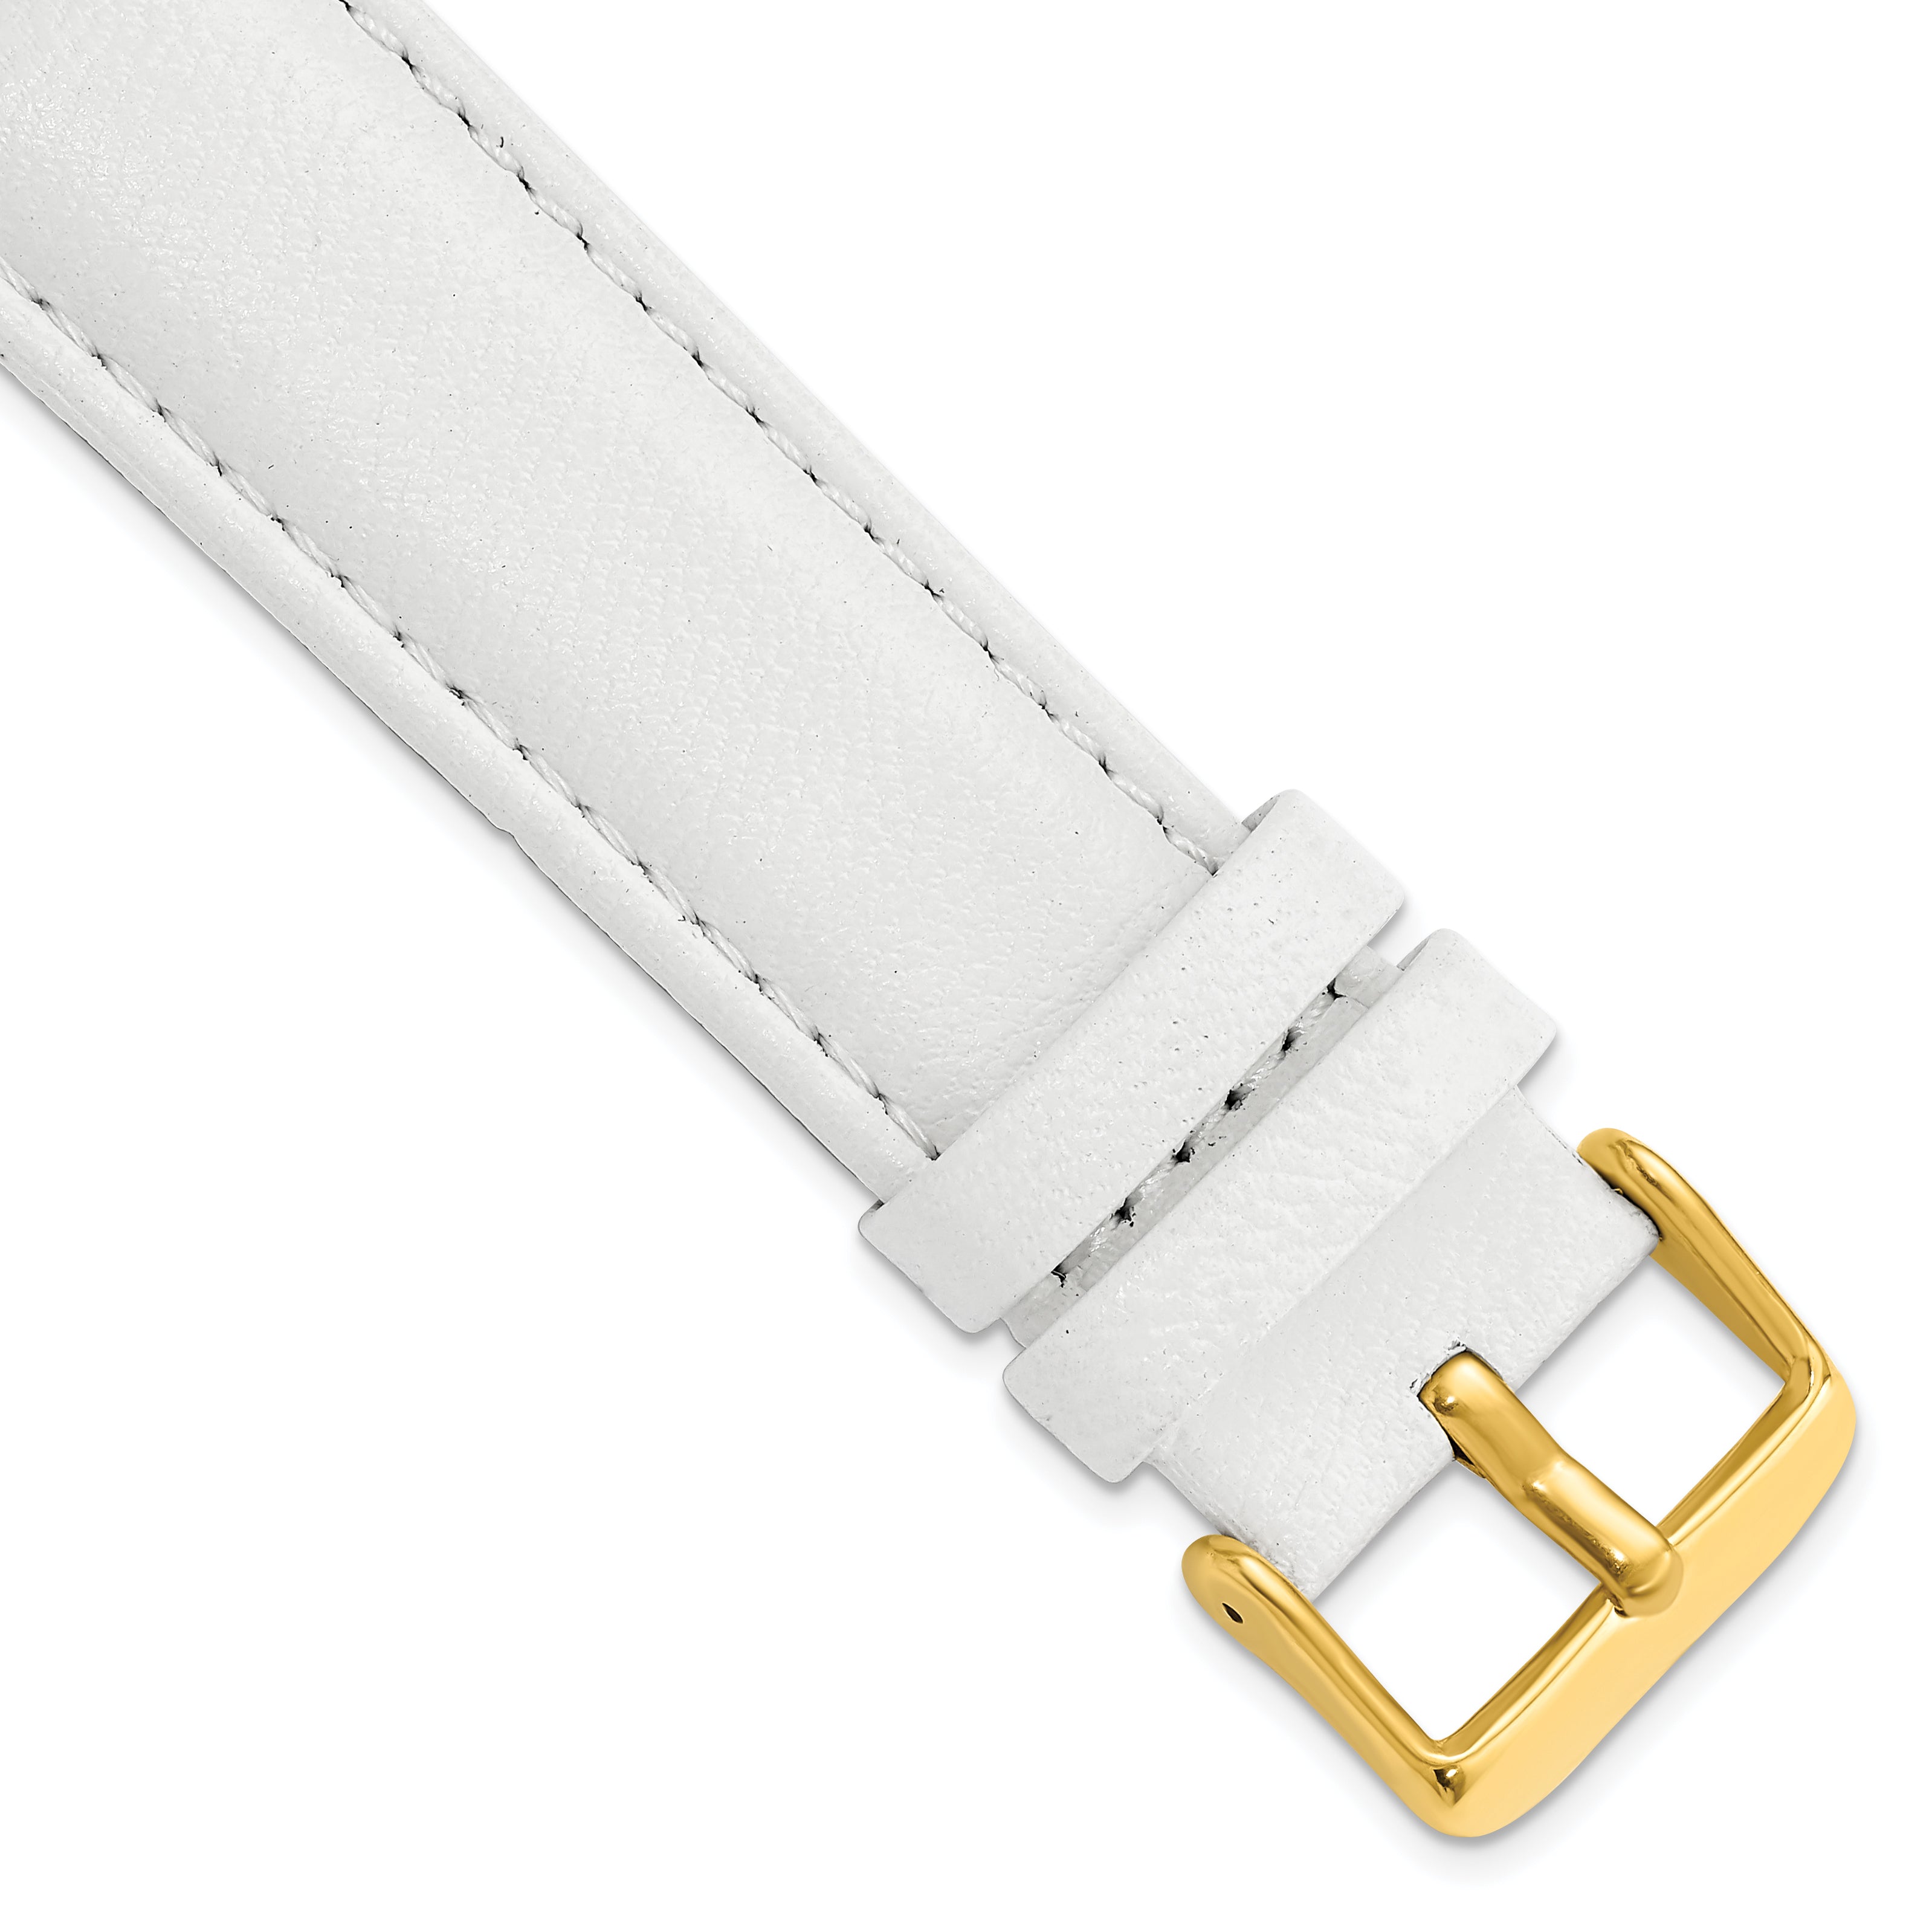 DeBeer 22mm White Glove Leather with Gold-tone Panerai Style Buckle 7.75 inch Watch Band